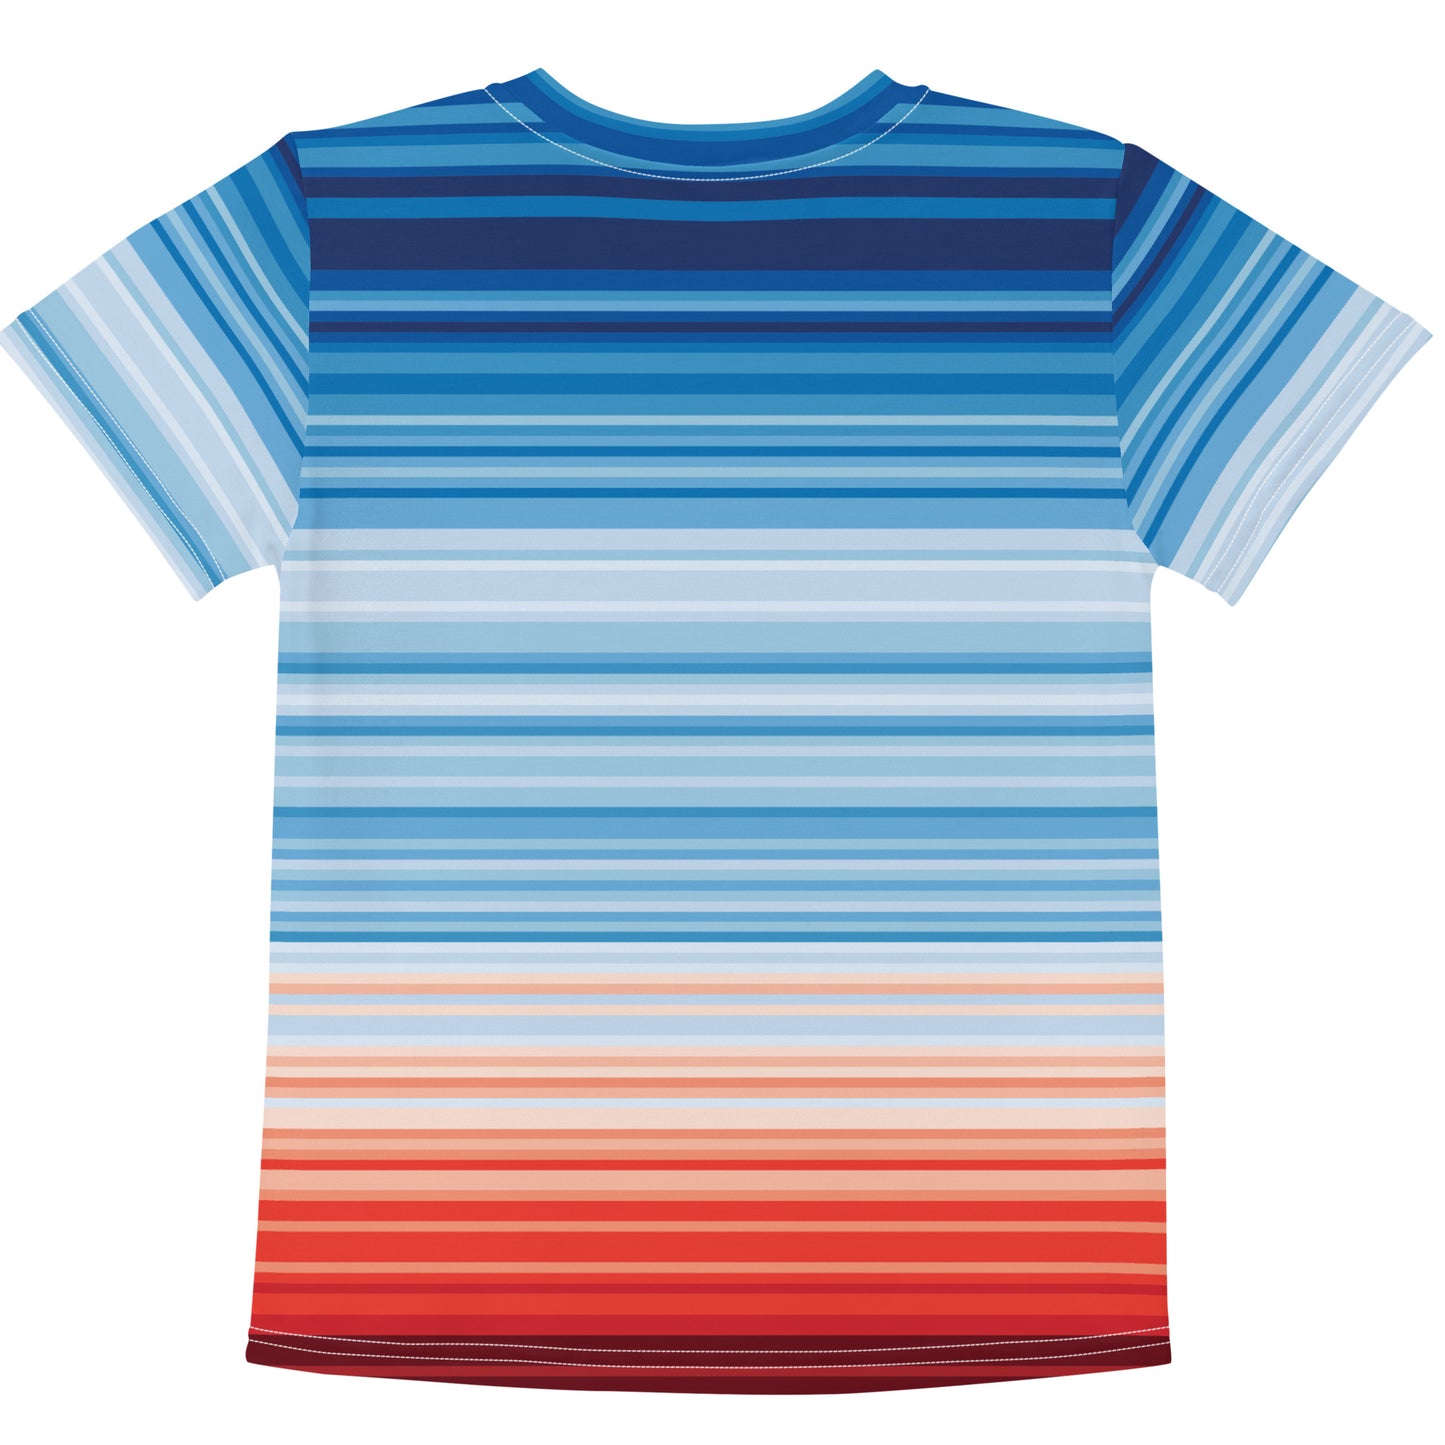 Climate Change Global Warming Stripes - Sustainably Made Kid's T-Shirt